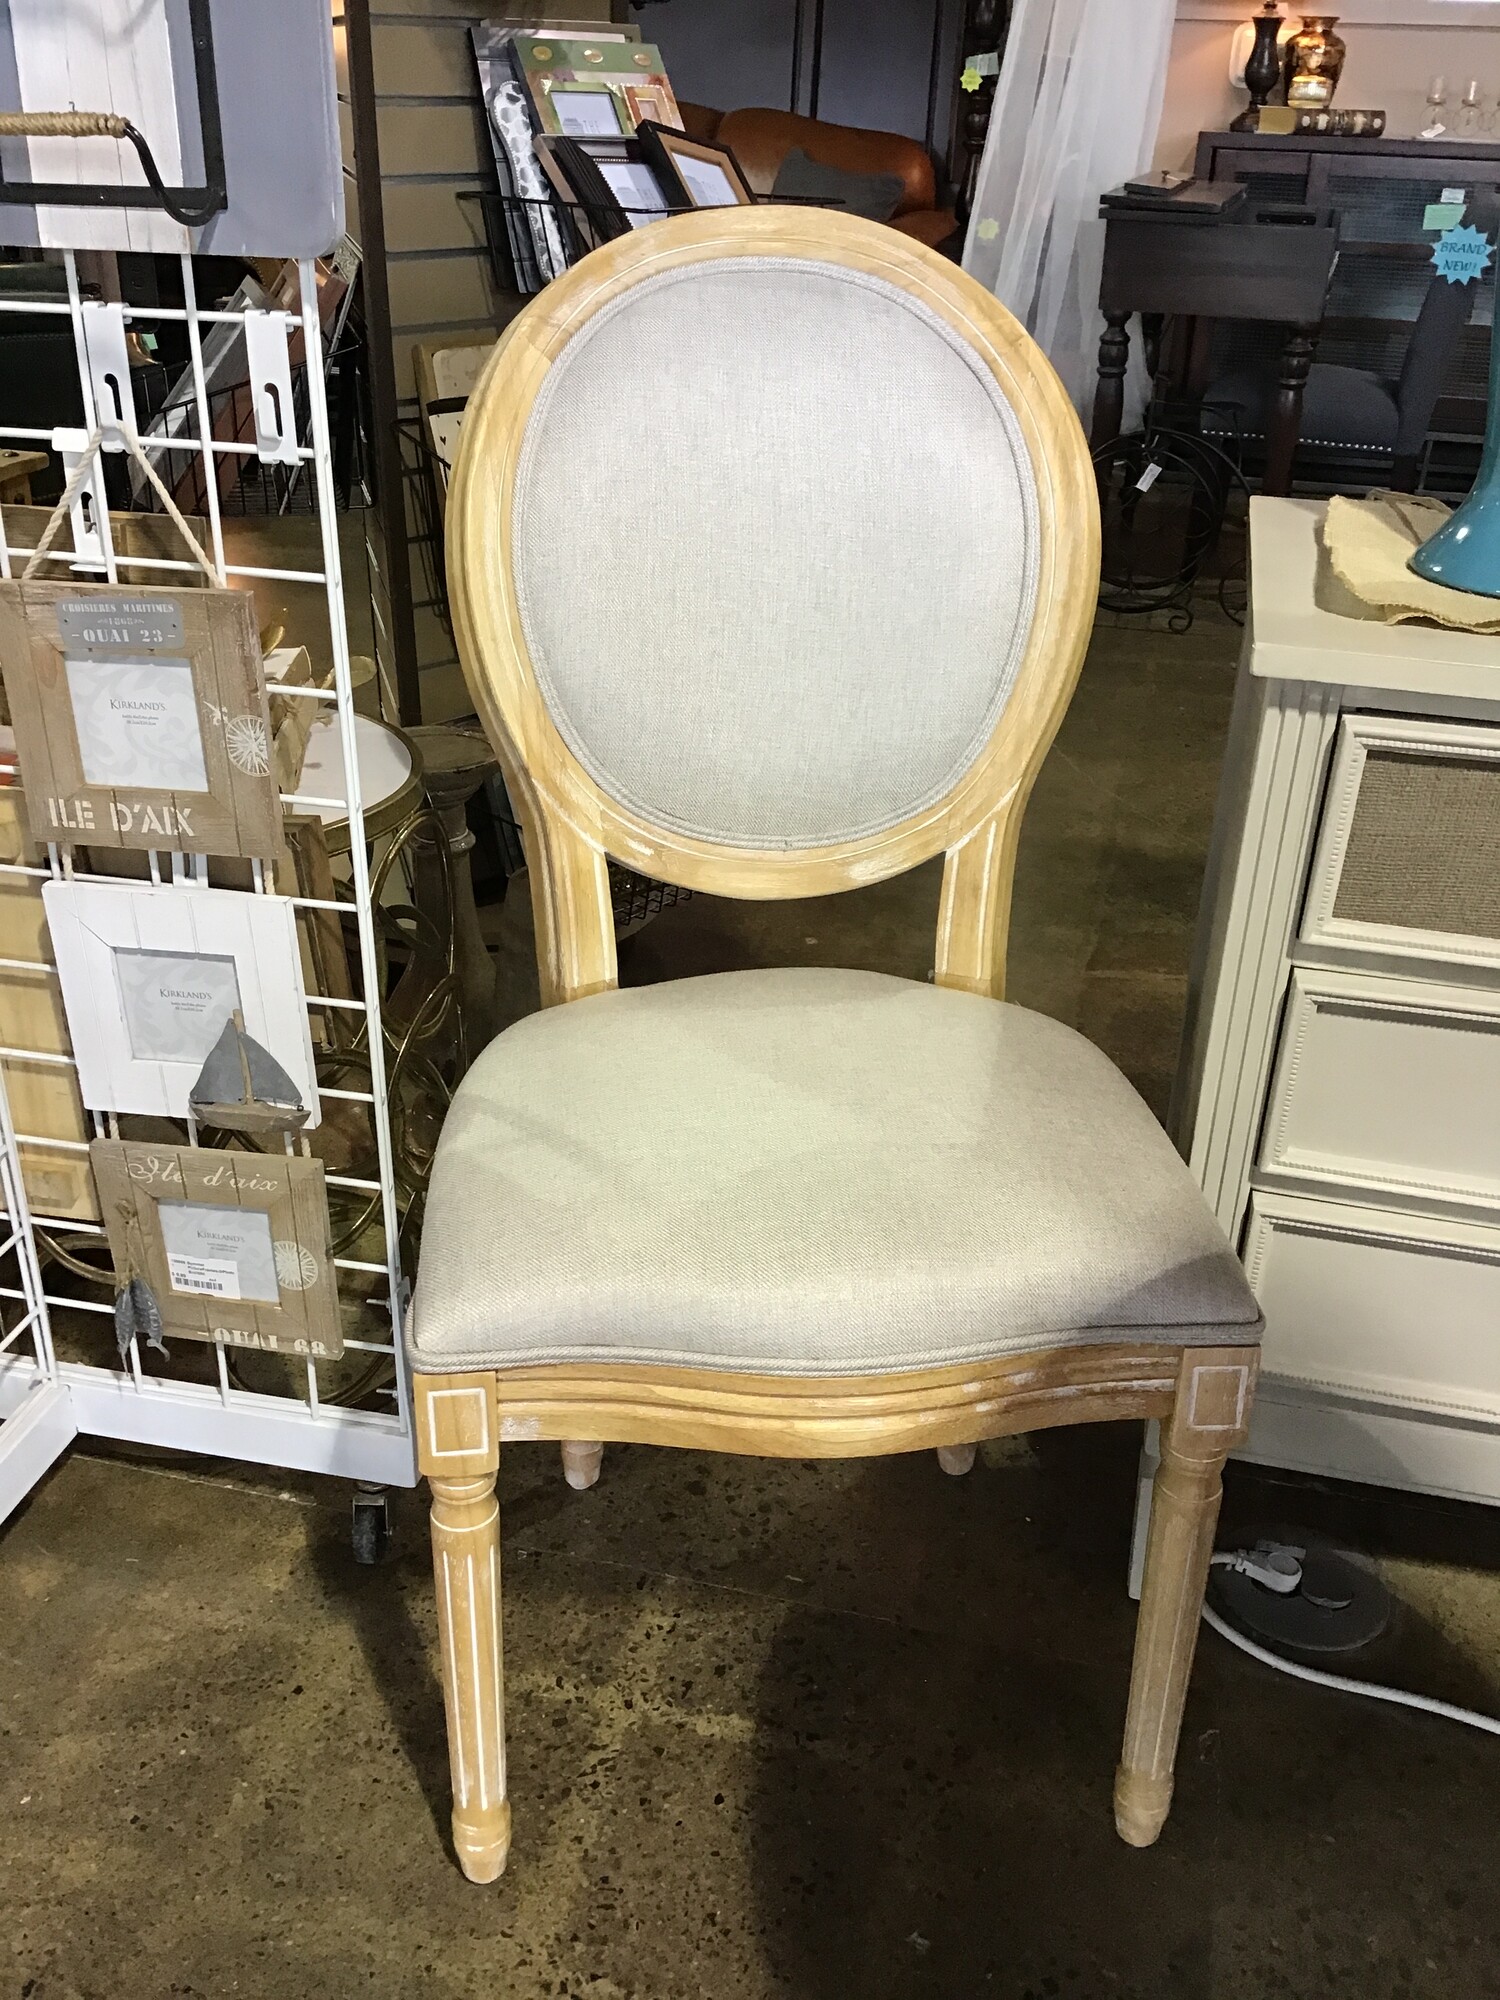 This round back upholstered chair features a driftwood frame and gray upholstery.
Dimensions are 21 in x 19 in x 40 in